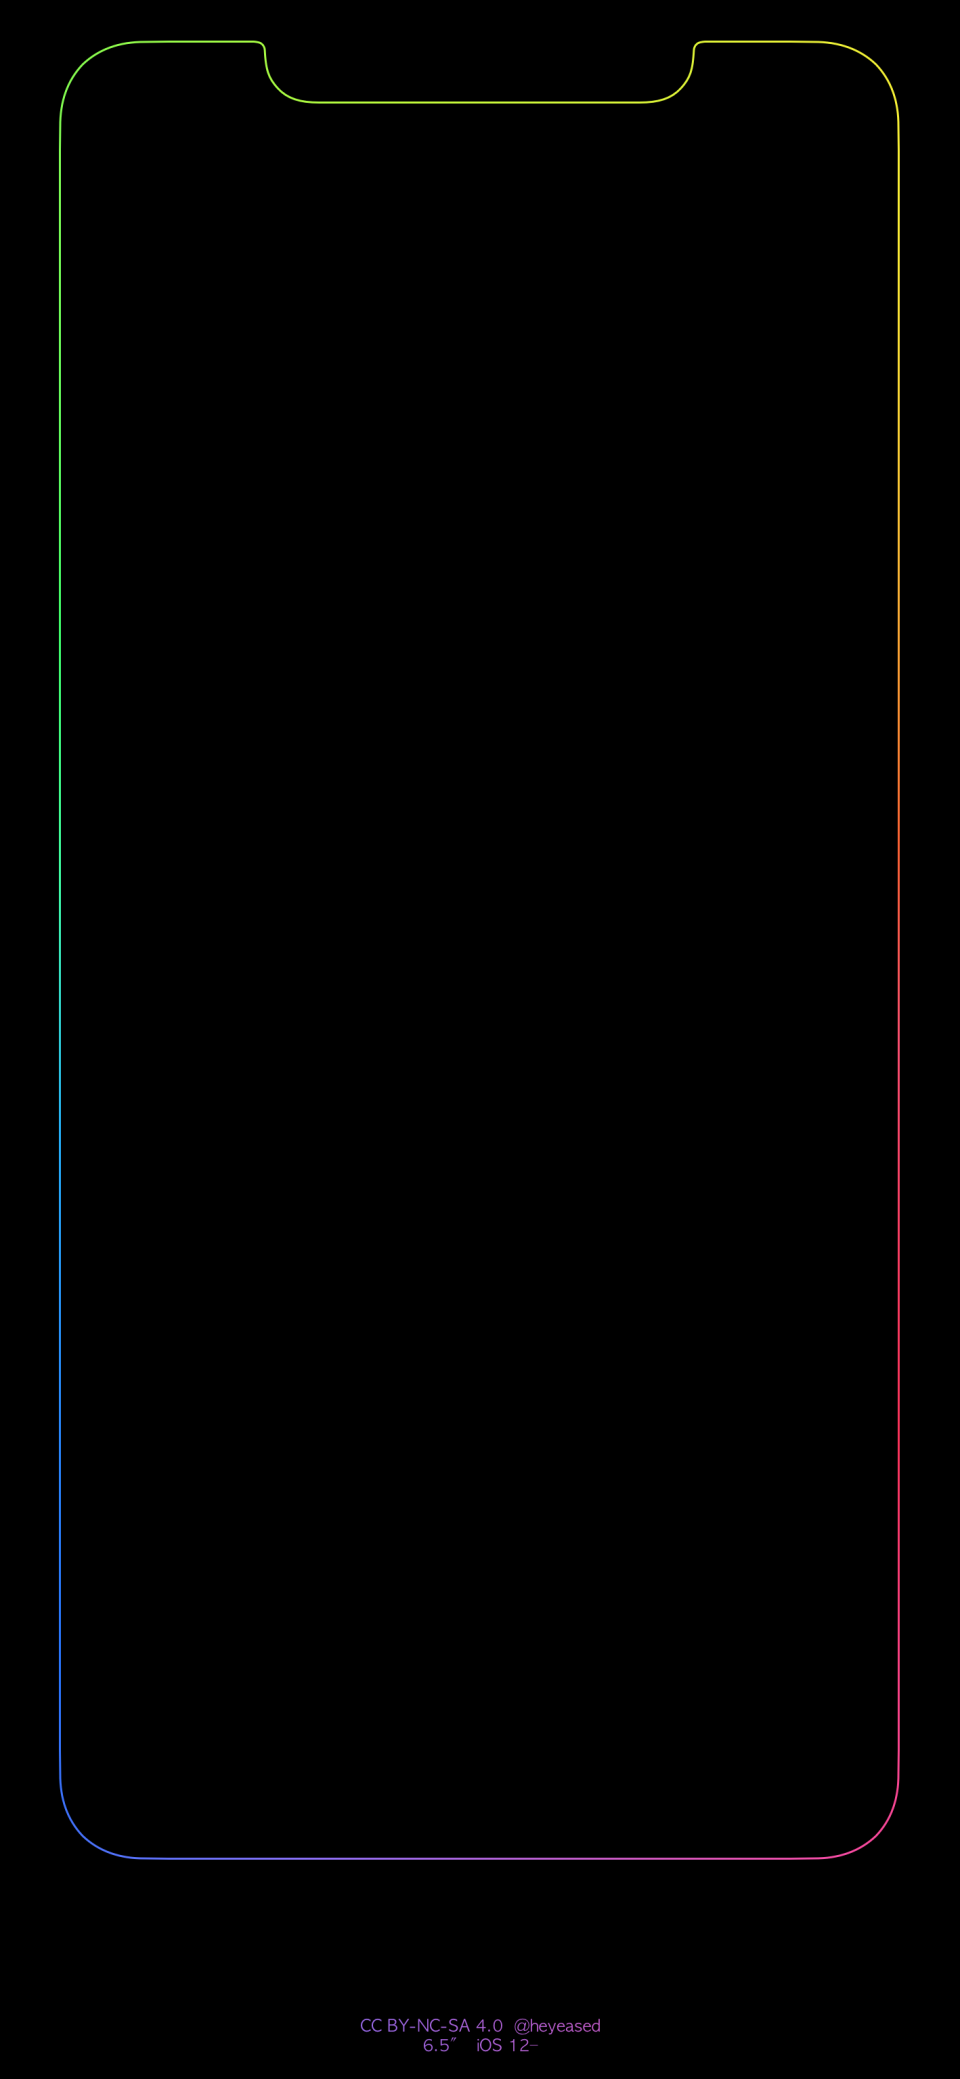 The ultimate iPhone X wallpaper has finally been updated for the iPhone XS Max